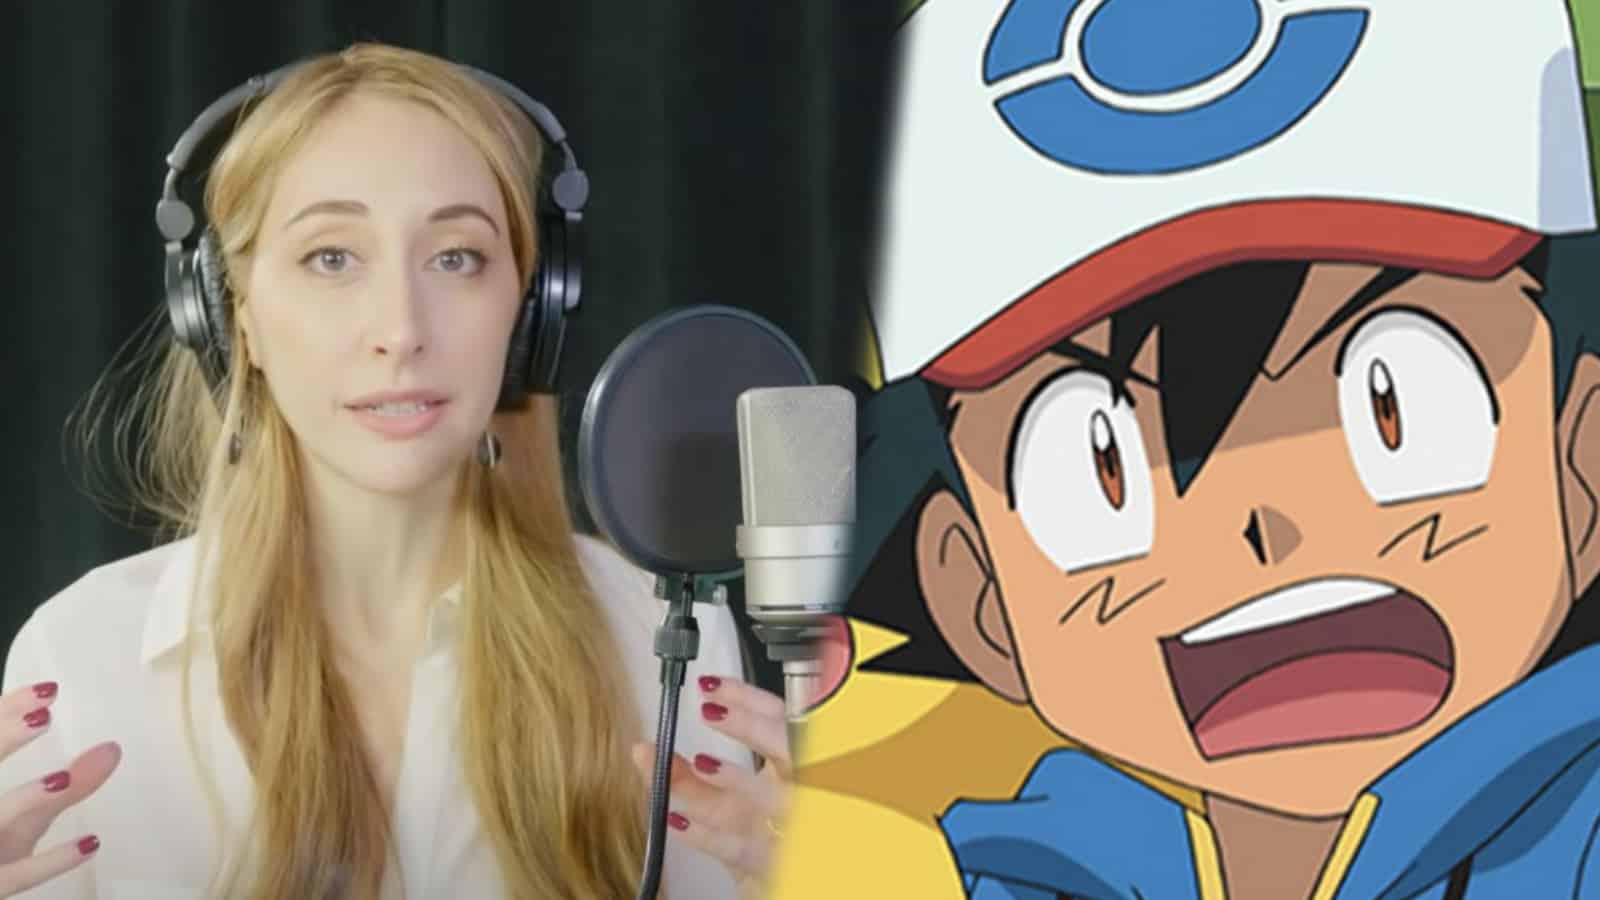 Pokemon Reveals Voice Cast and Staff for Next Series